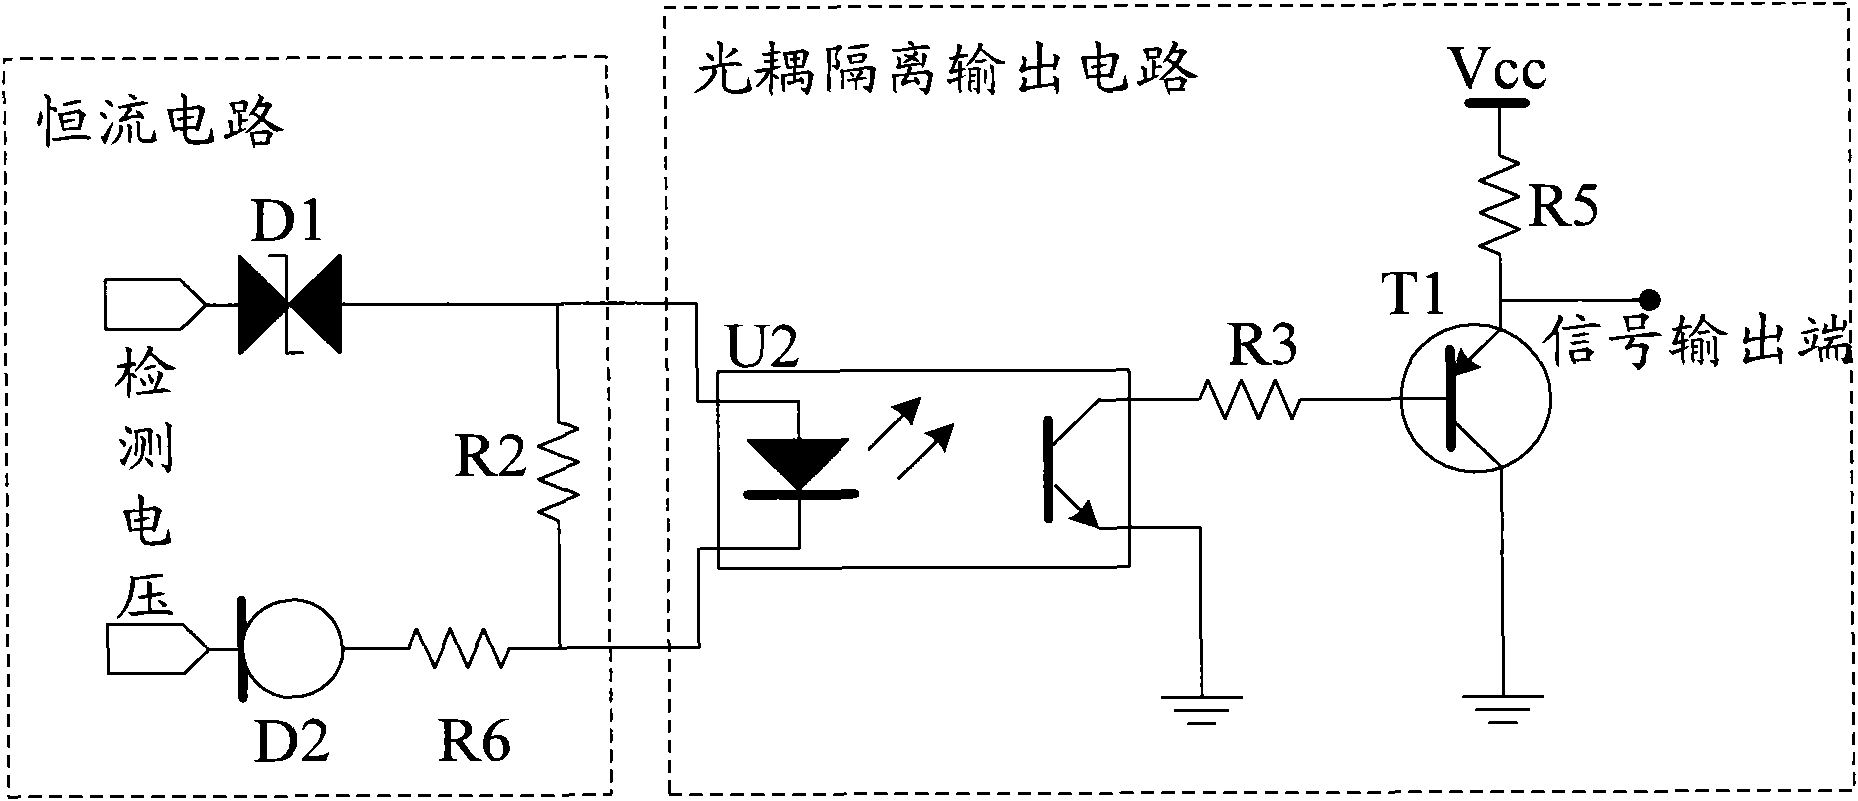 Relay protection device detection circuit